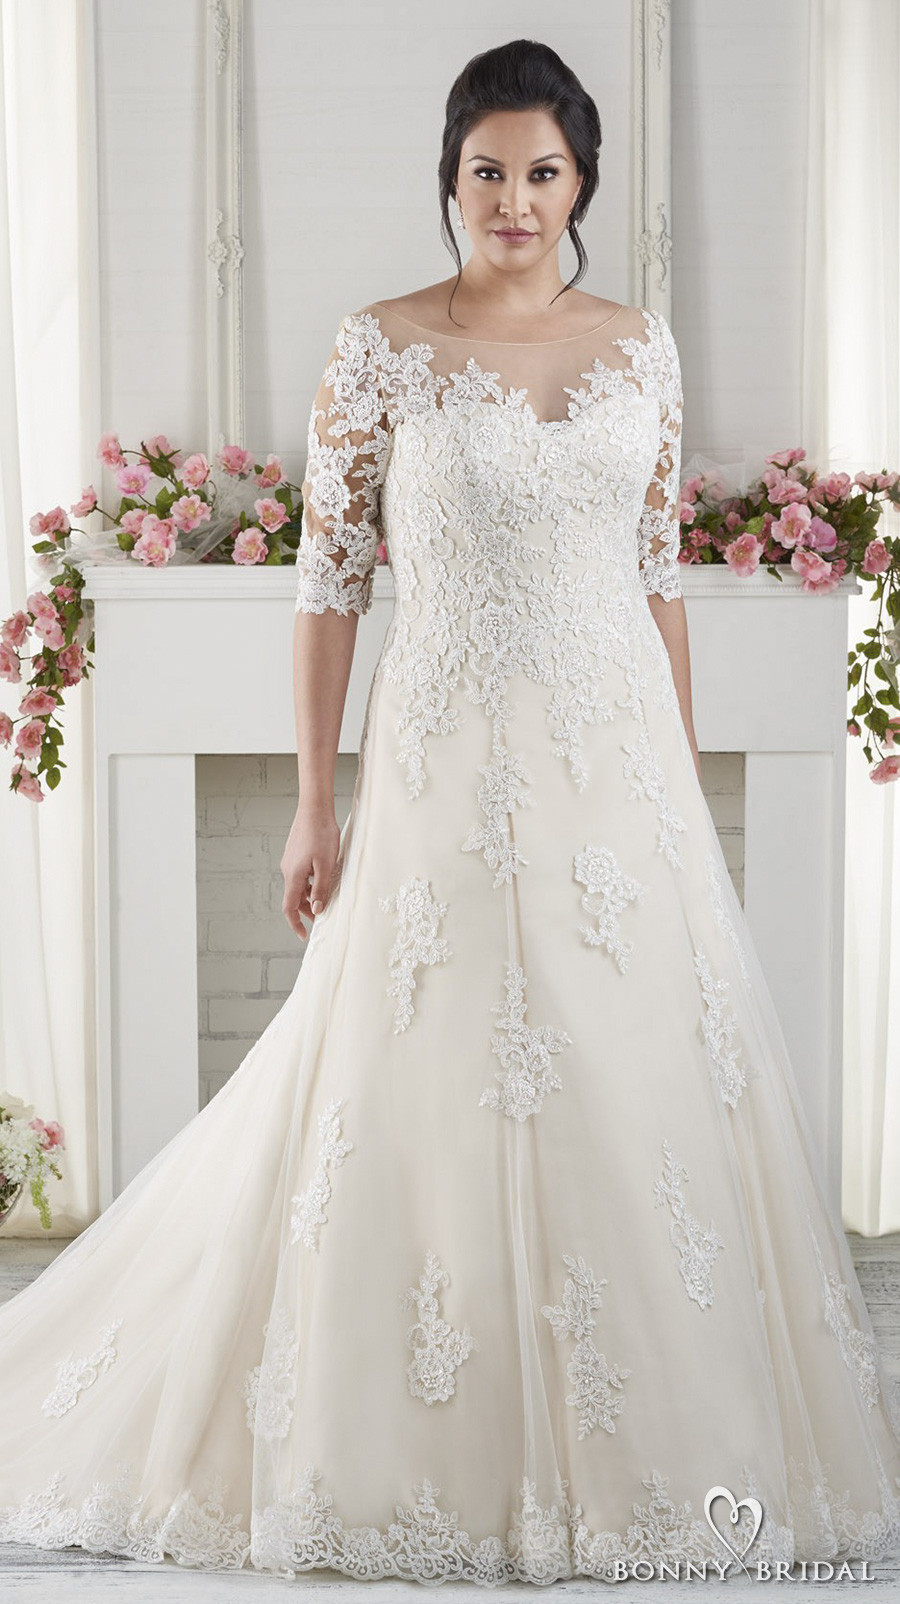 Plus Size Wedding Gowns With Sleeves
 Bonny Bridal Wedding Dresses — Unfor table Styles for